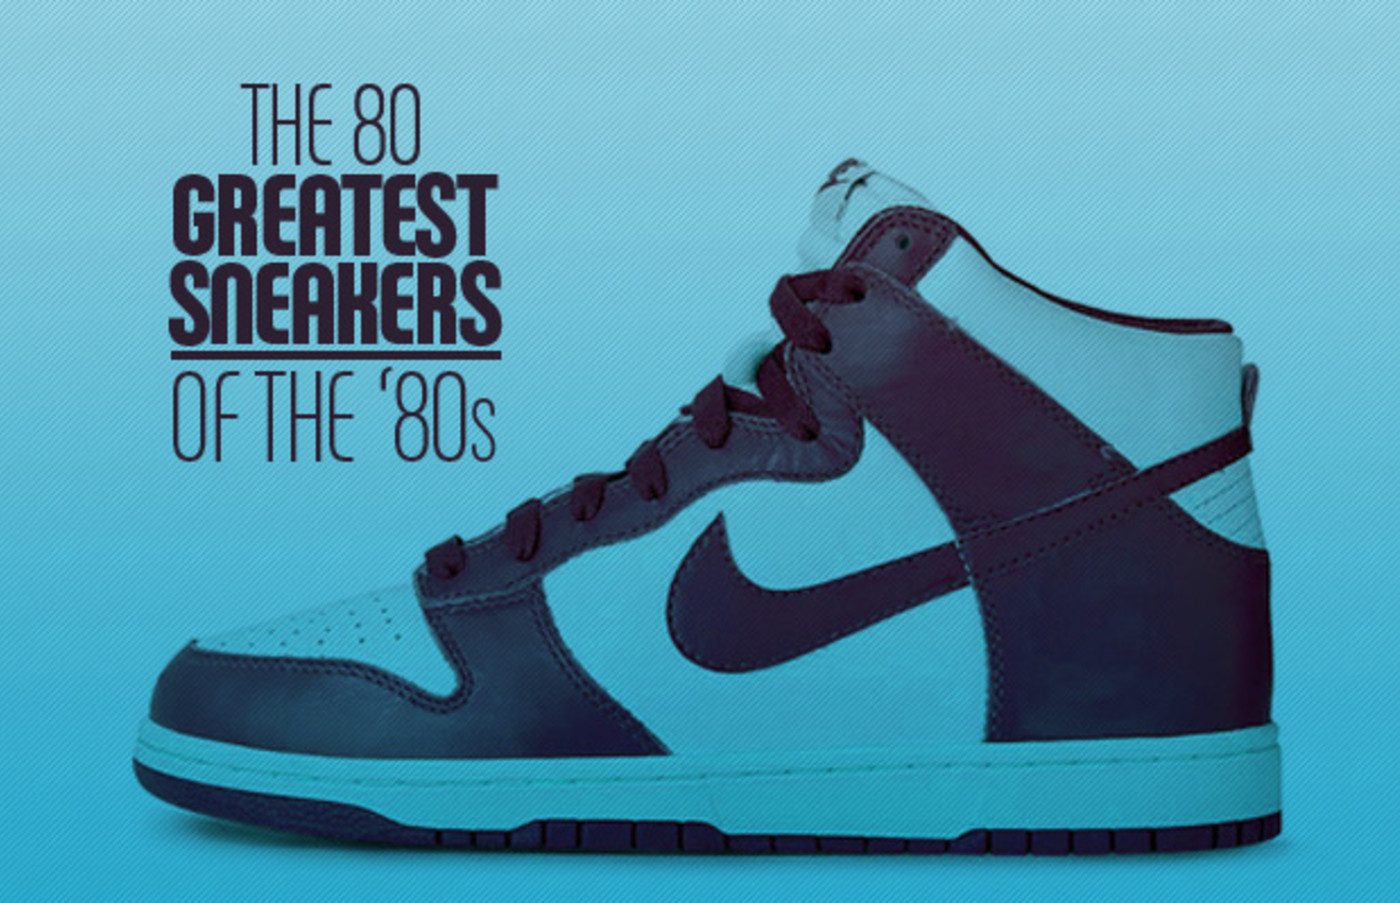 verontreiniging verdamping Kalmerend The Definitive List of the 80 Greatest Sneakers of the 80s | Complex